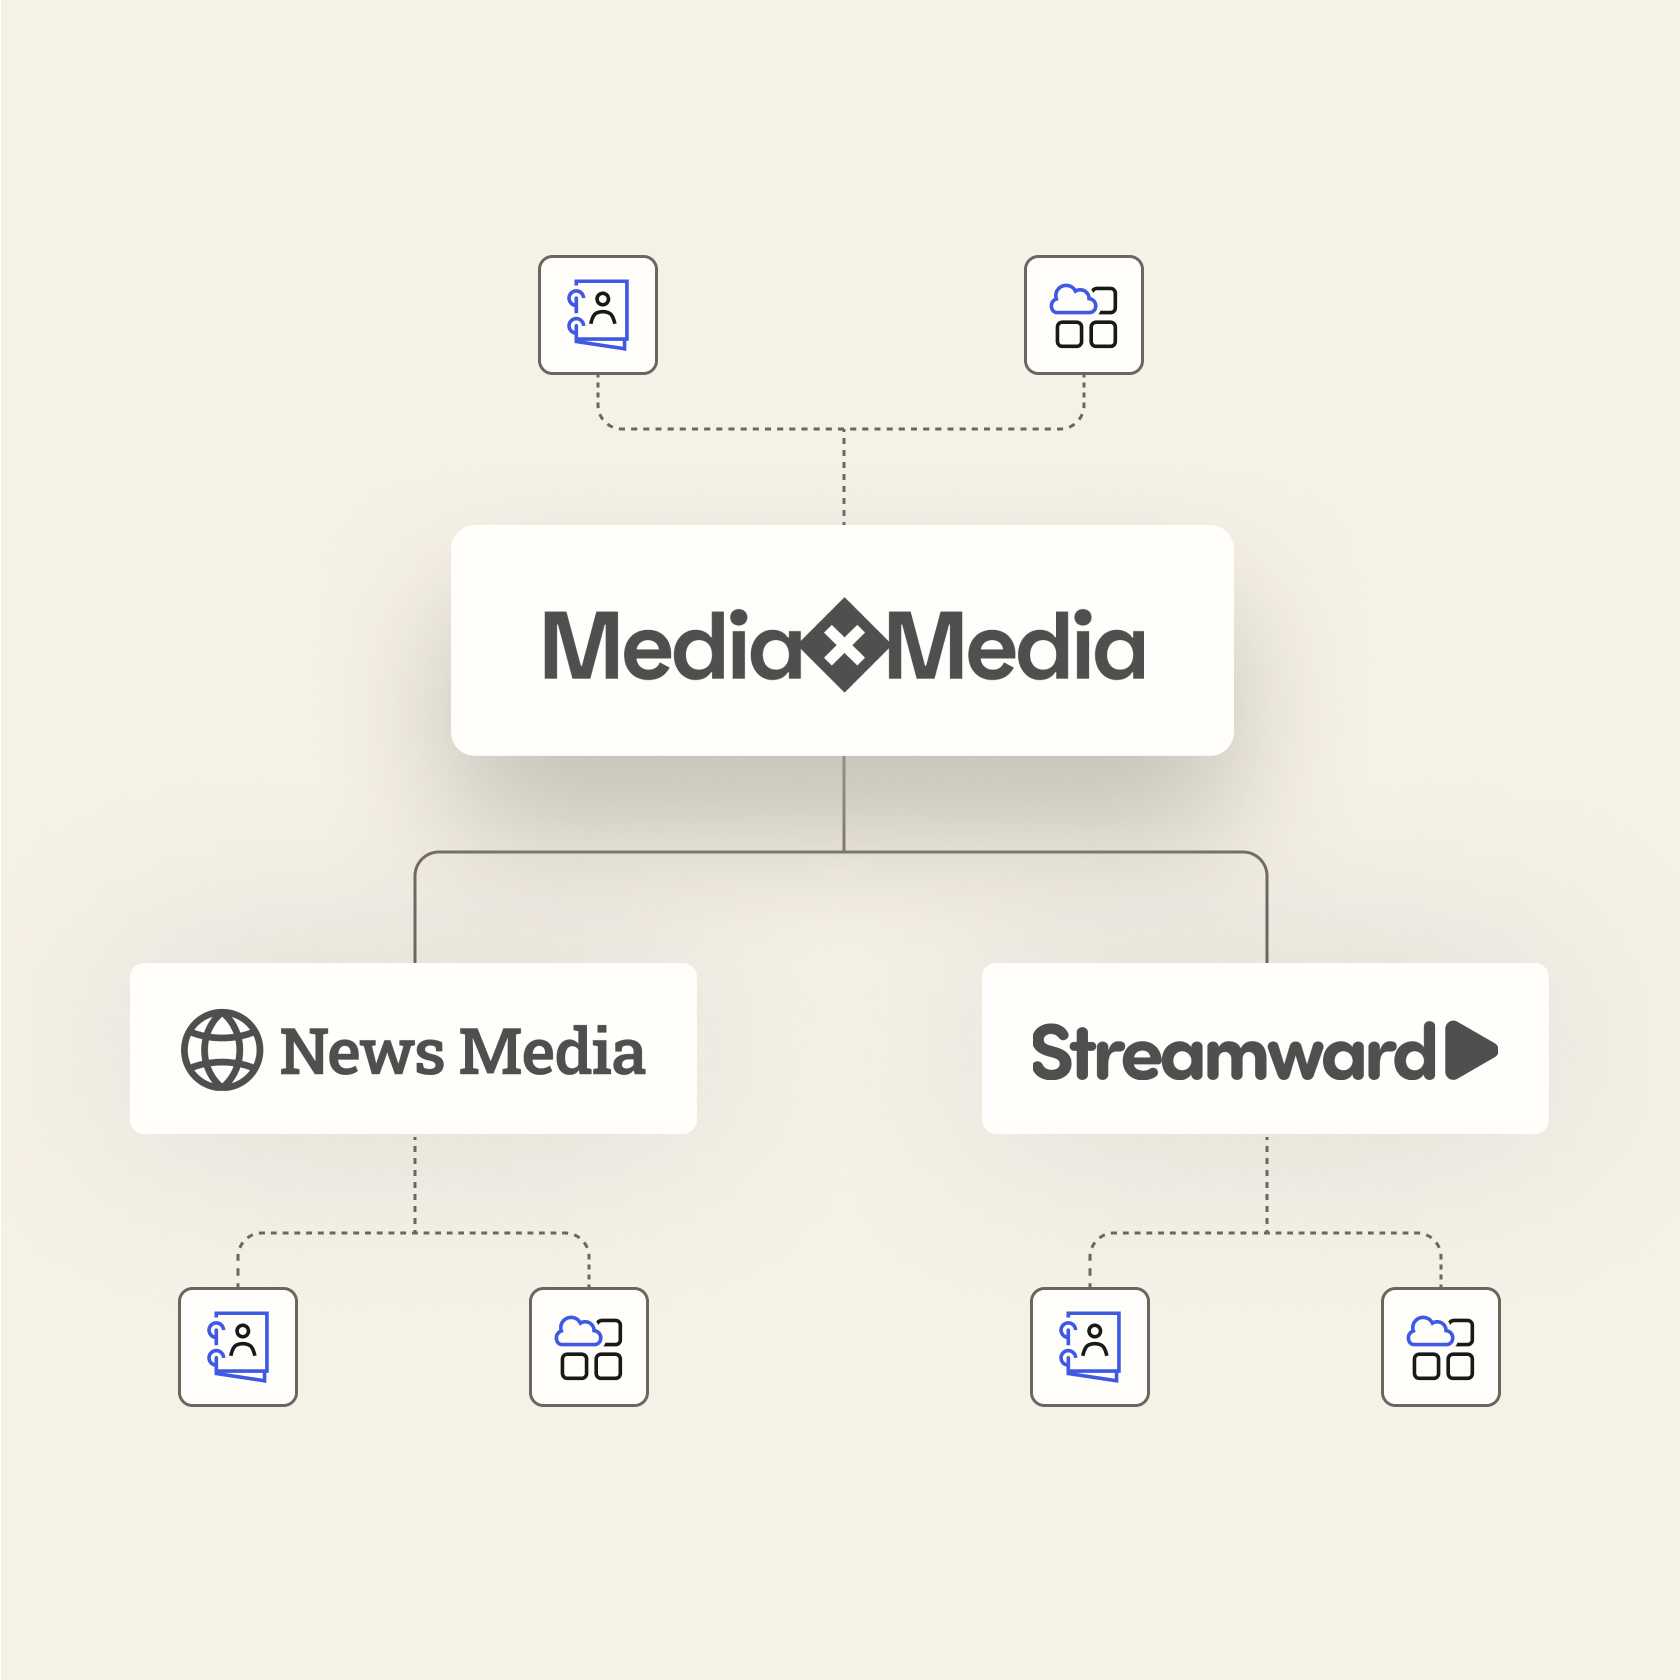 Diagram of the company mediaxmedia at the center with dotted lines to the companies news media and streamward underneath.